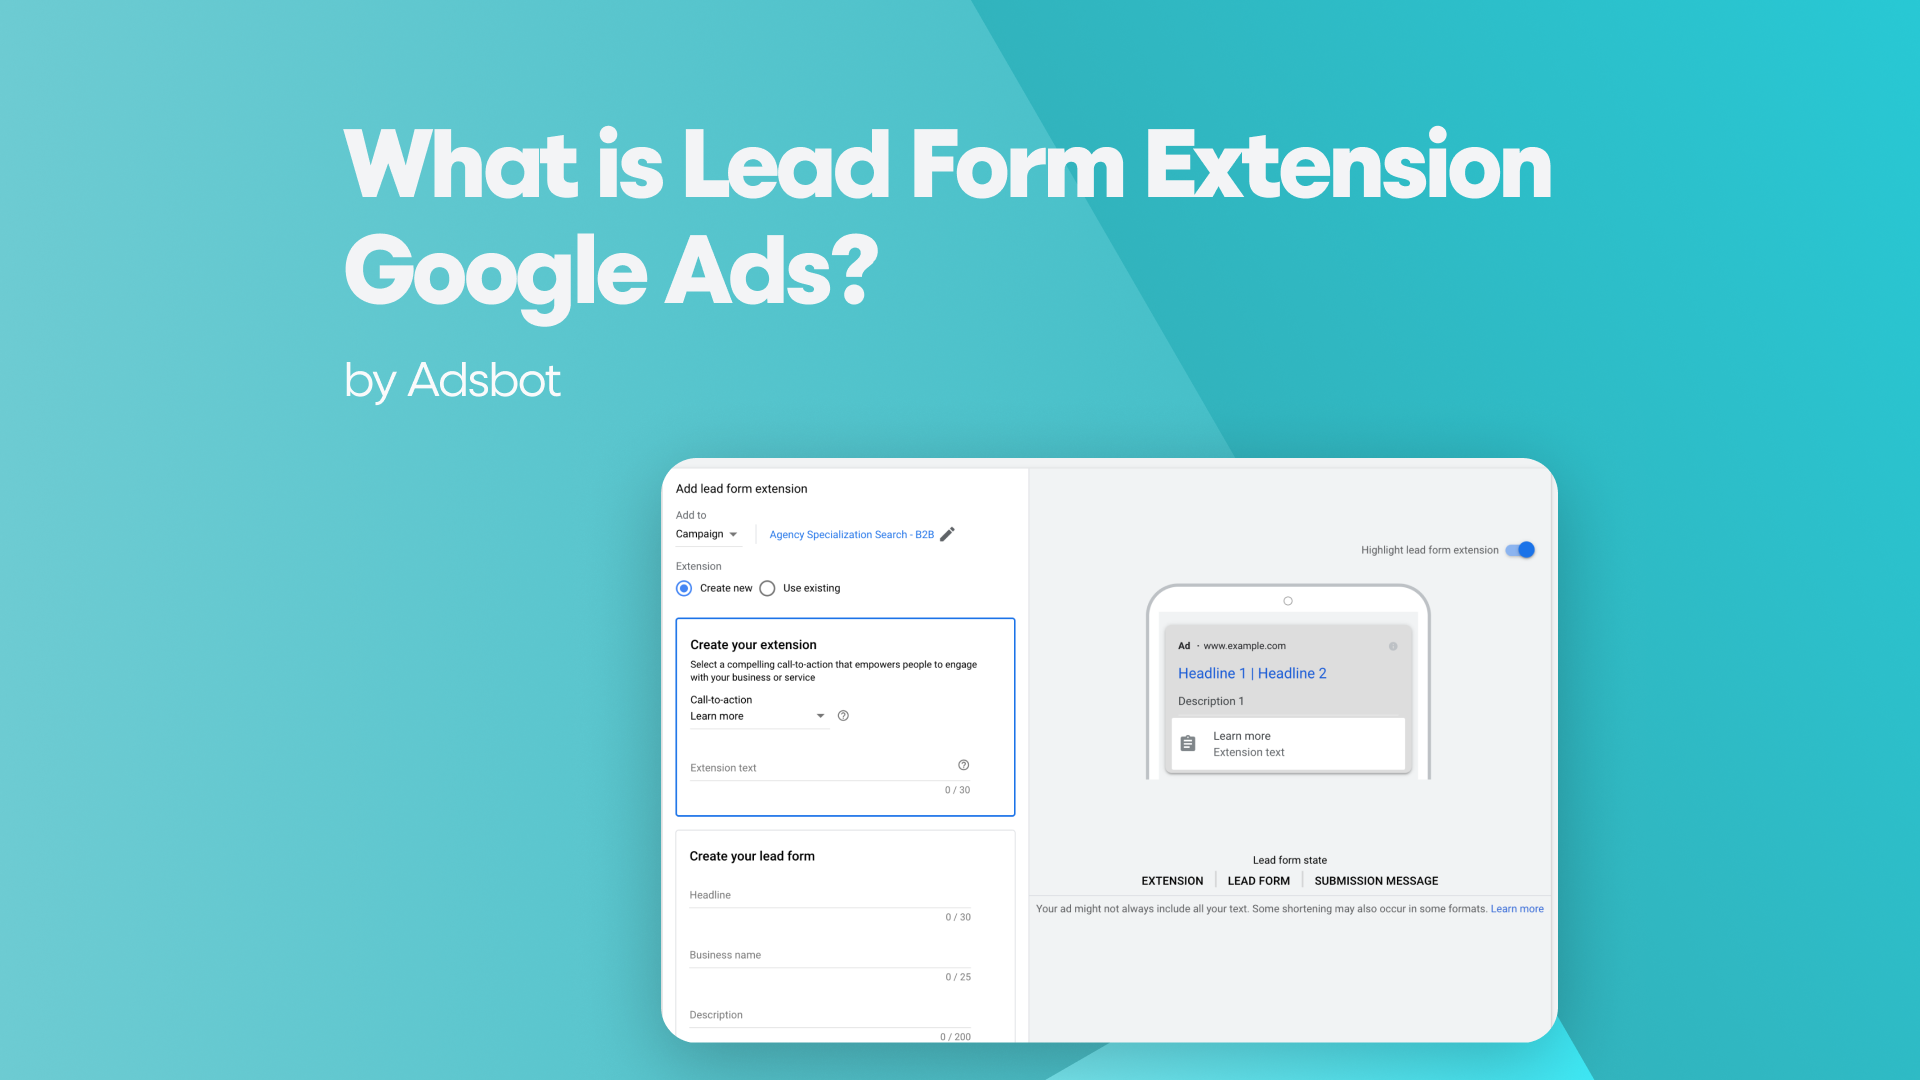 What is Lead Form Extension Google Ads